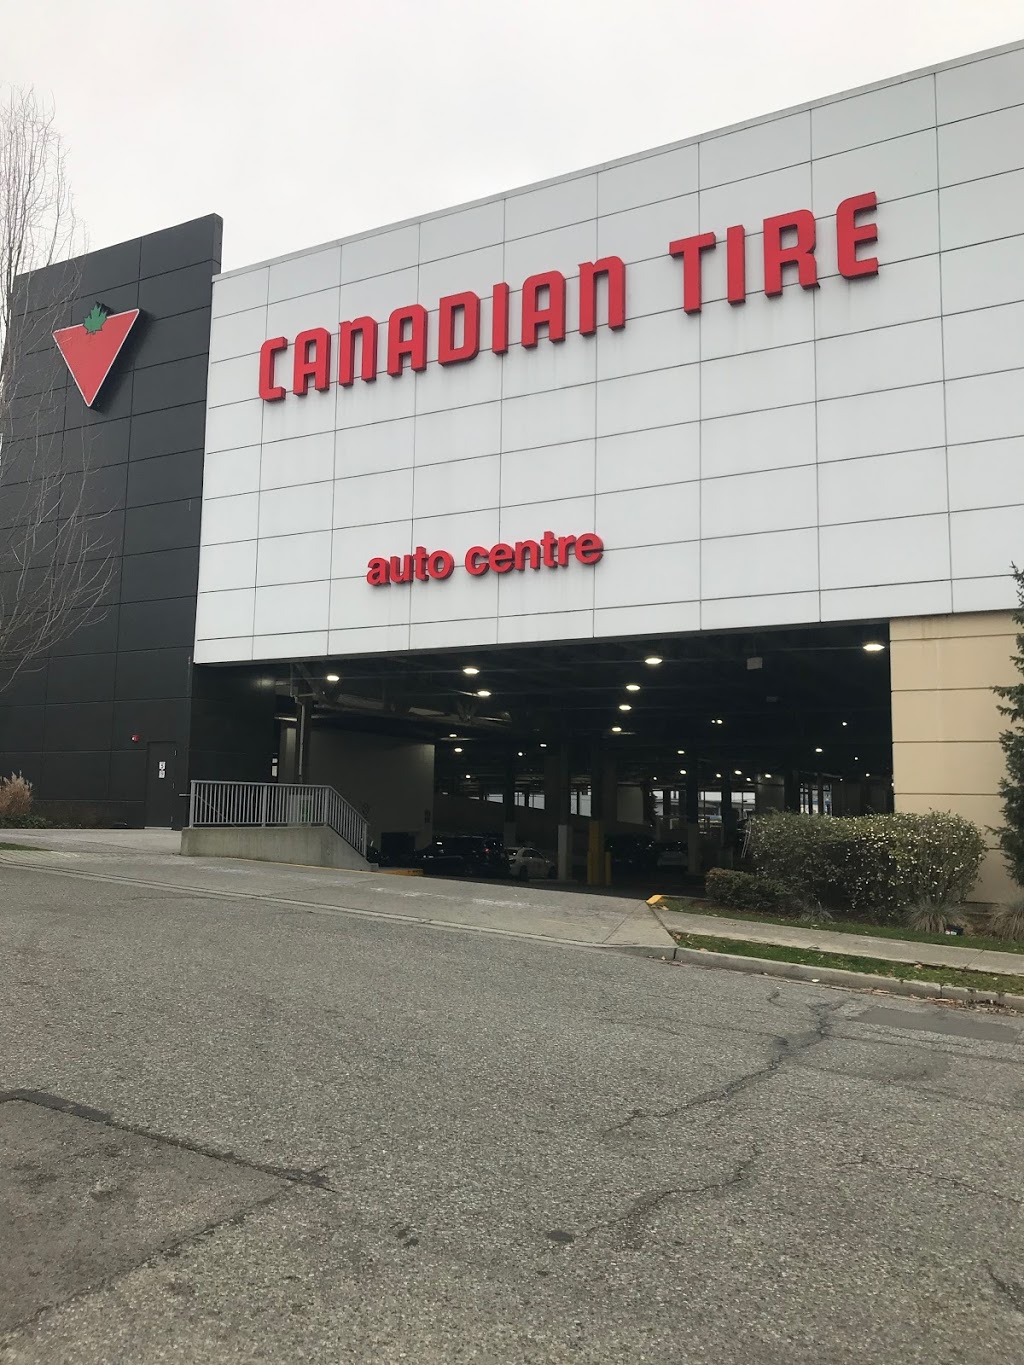 Canadian Tire Auto Service Centre | car repair | 2830 Bentall St, Vancouver, BC V5M 4H4, Canada | 6044313572 OR +1 604-431-3572